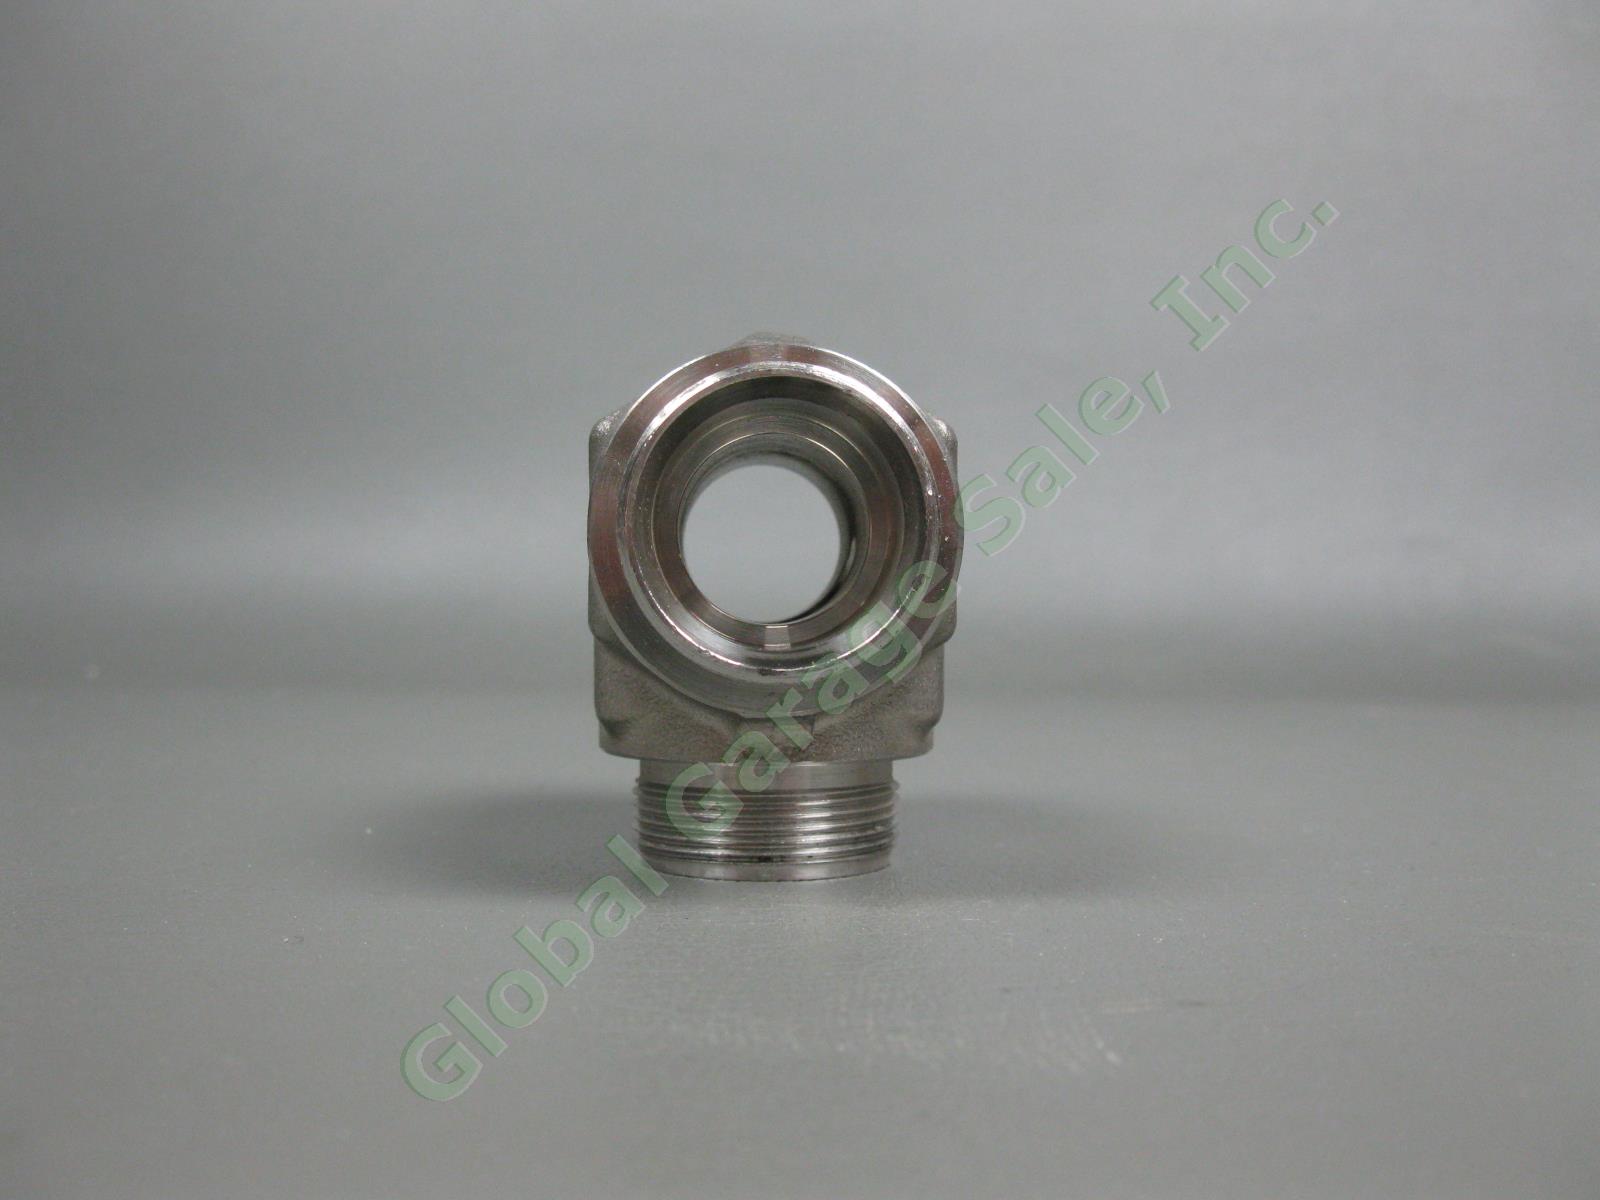 6 Swagelok 7/8" OD SS 314 Compression Tube Fitting Union Tee Nut Less Ferrules 9